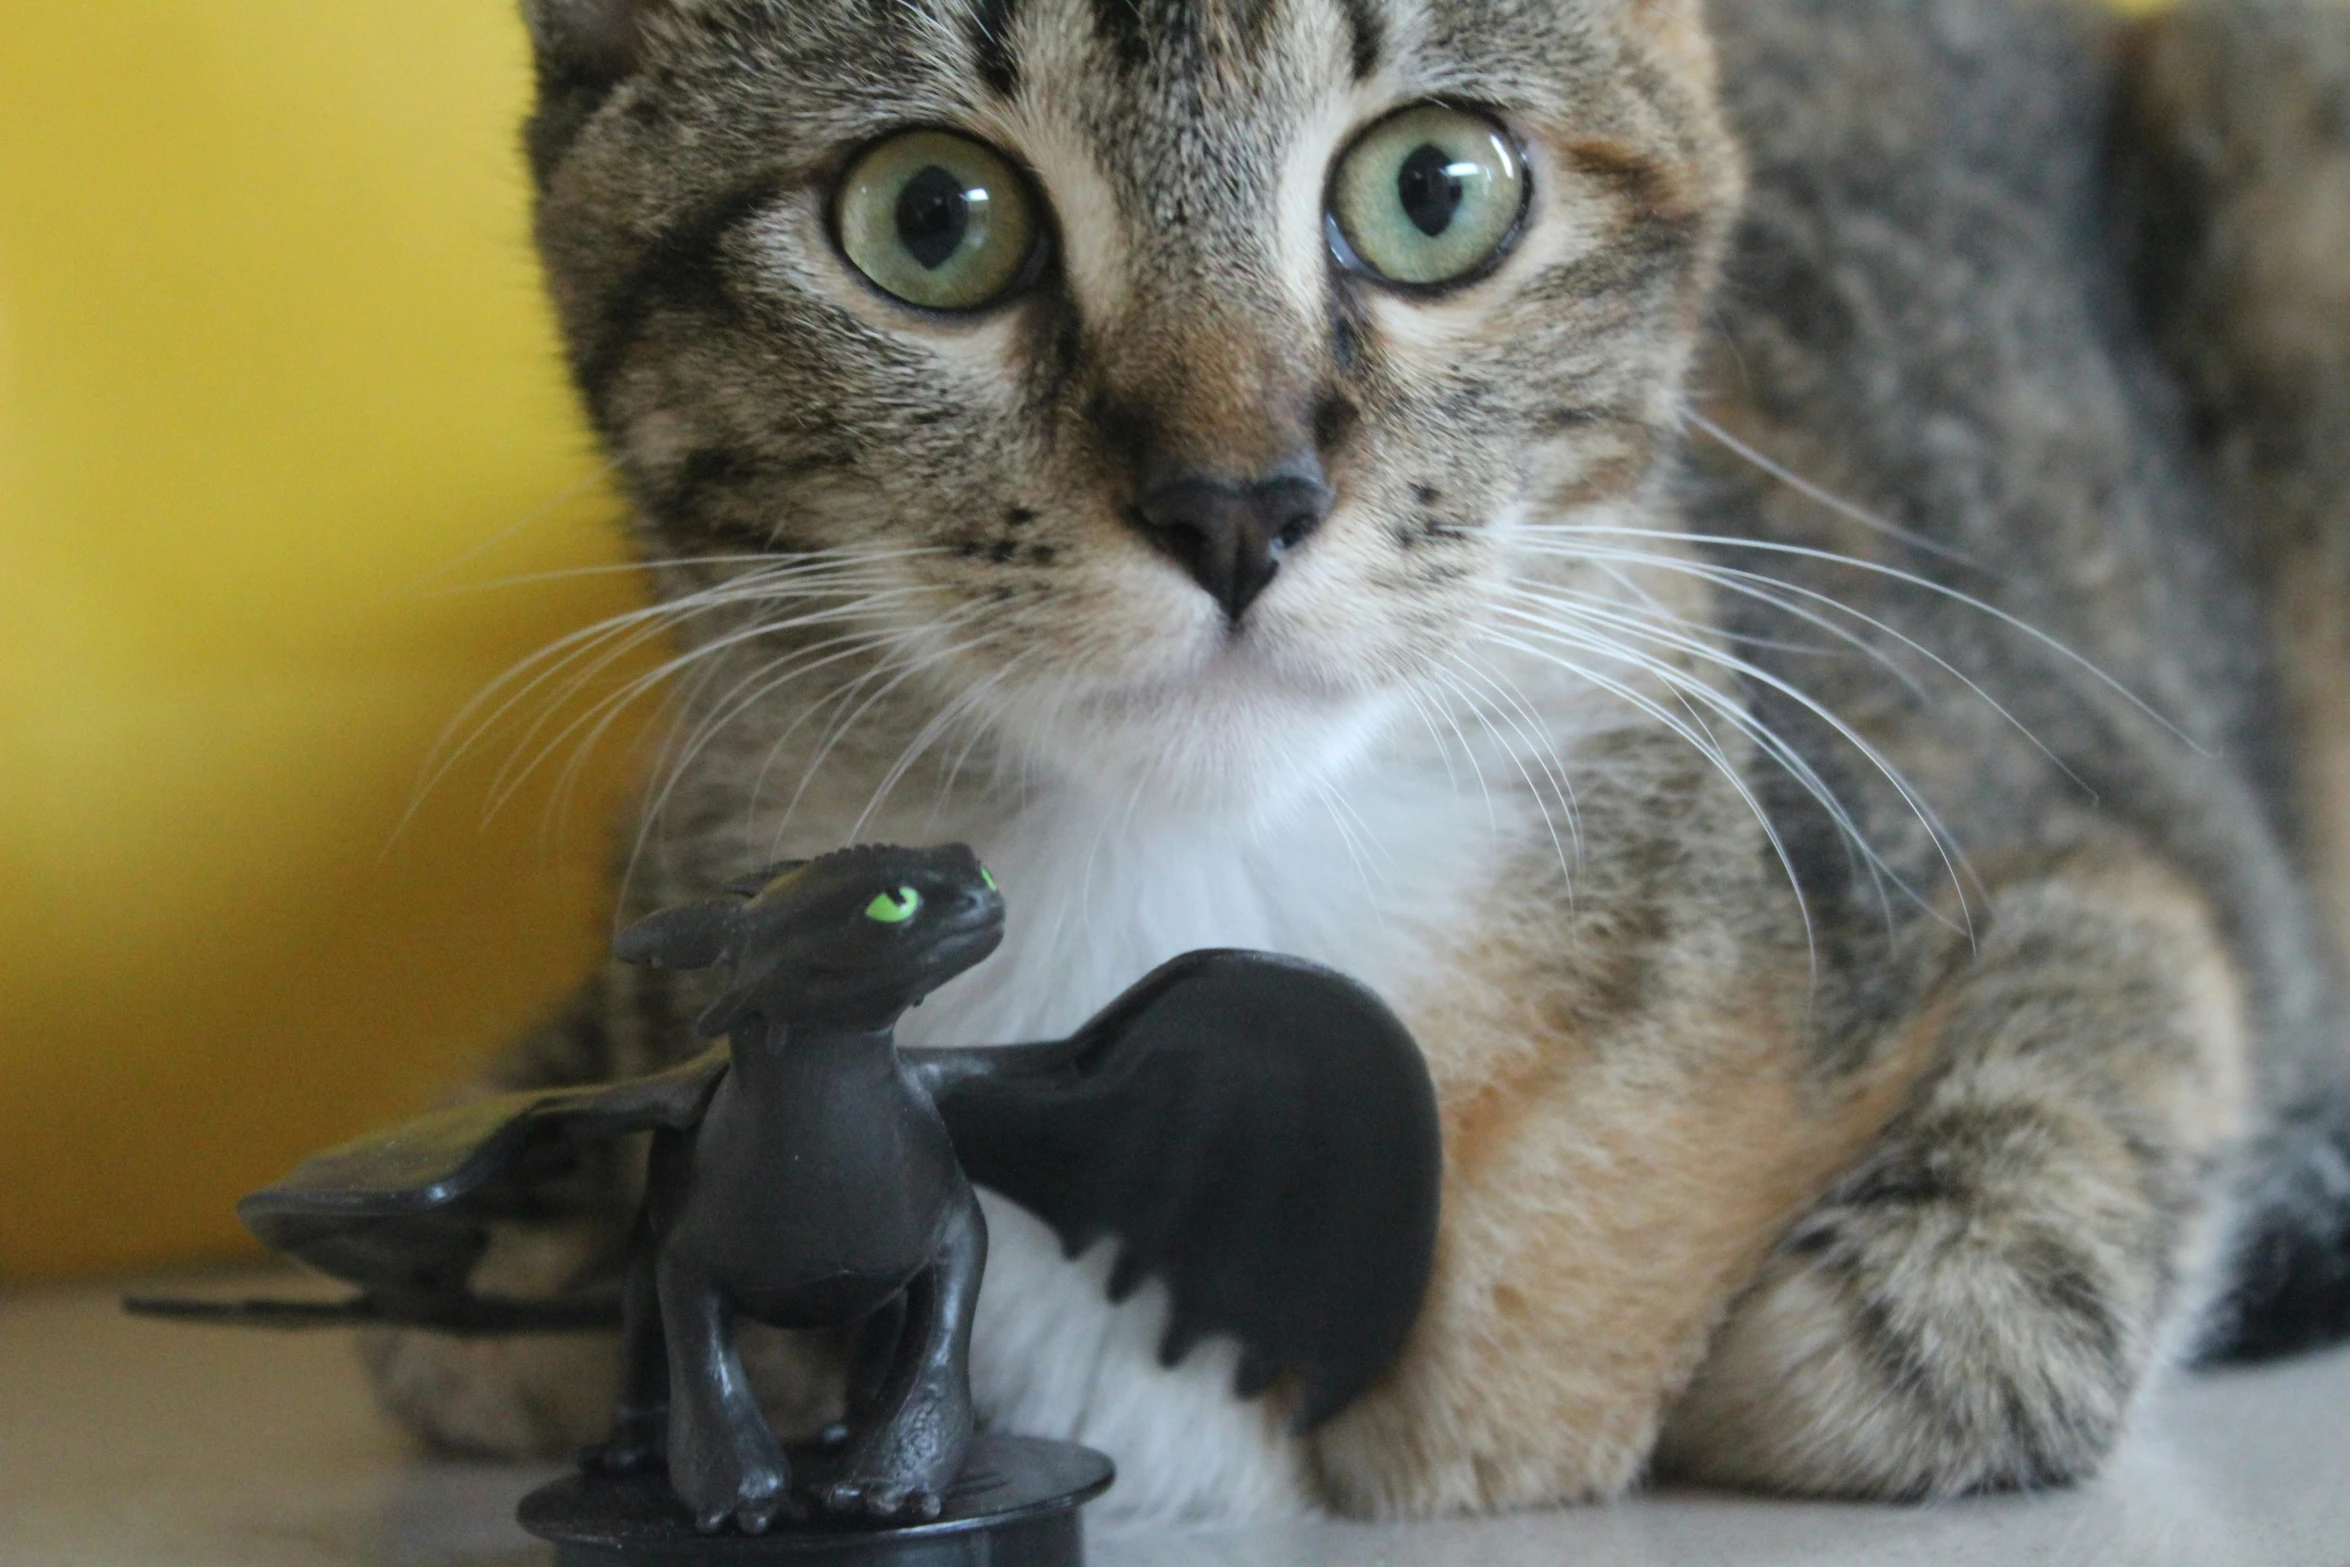 the grey cat is near a toy dragon